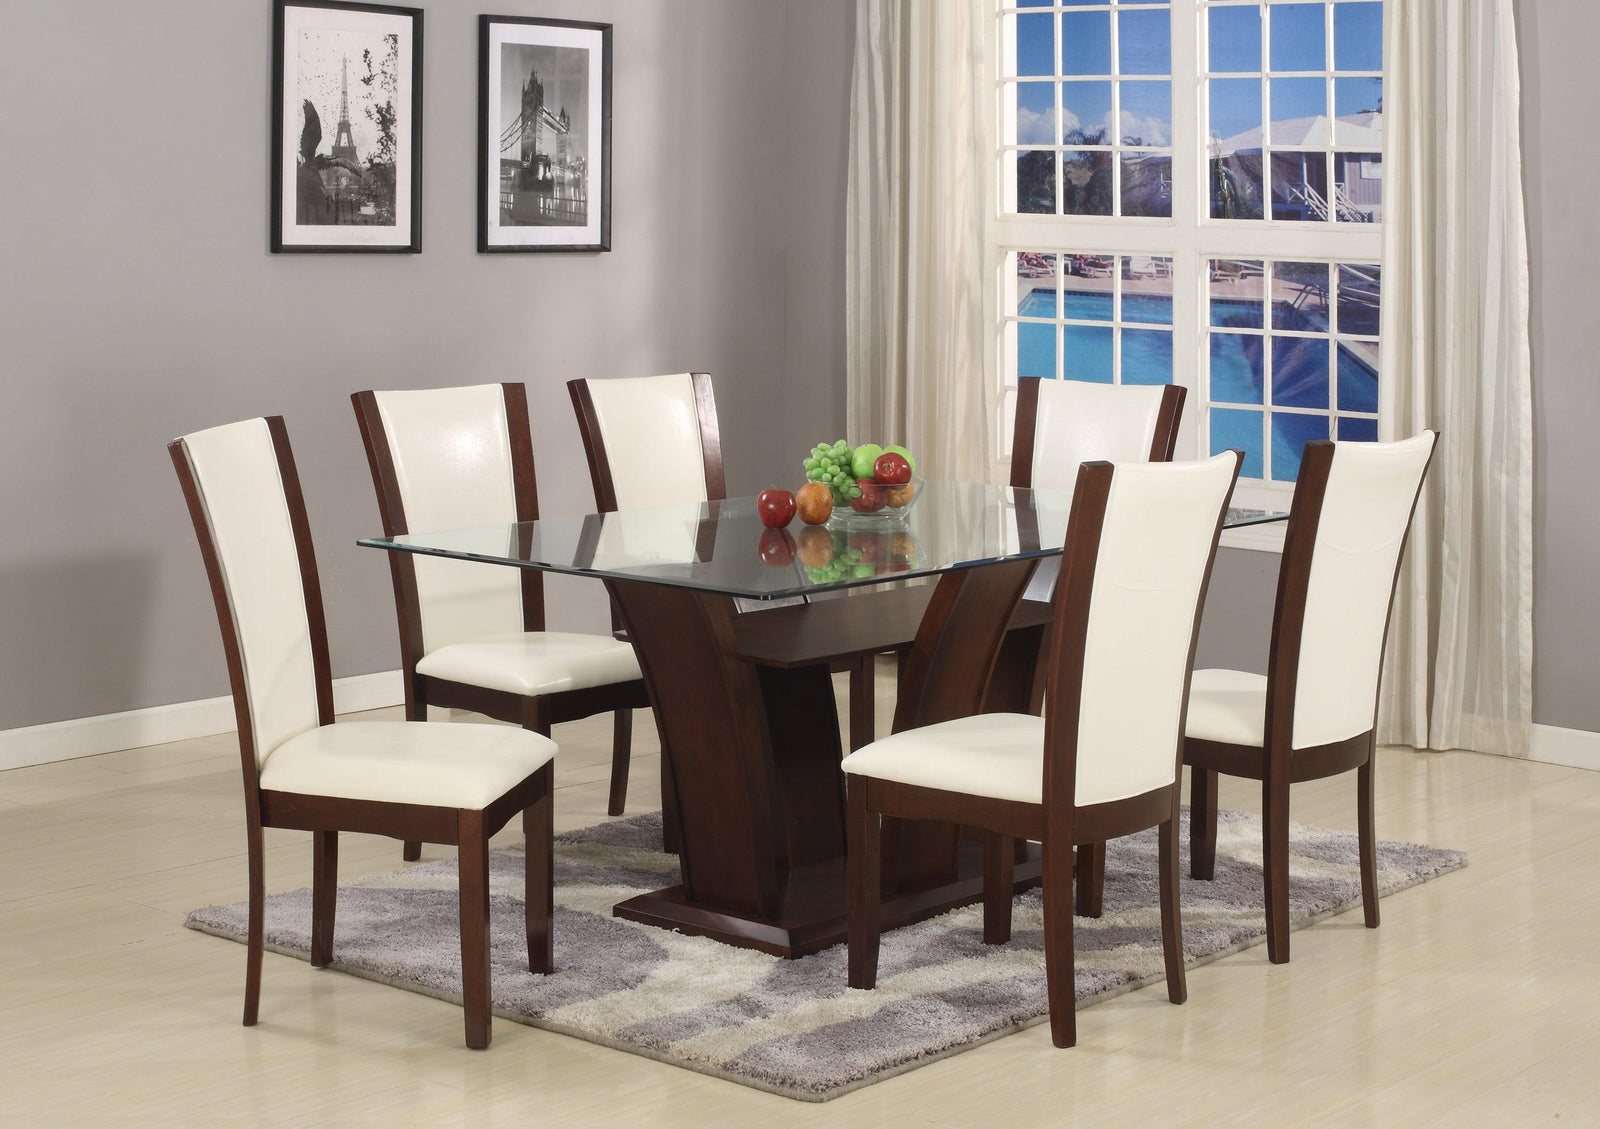 Camelia Brown-White Faux Leather Round Glass-top Dining Room Set - Ella Furniture